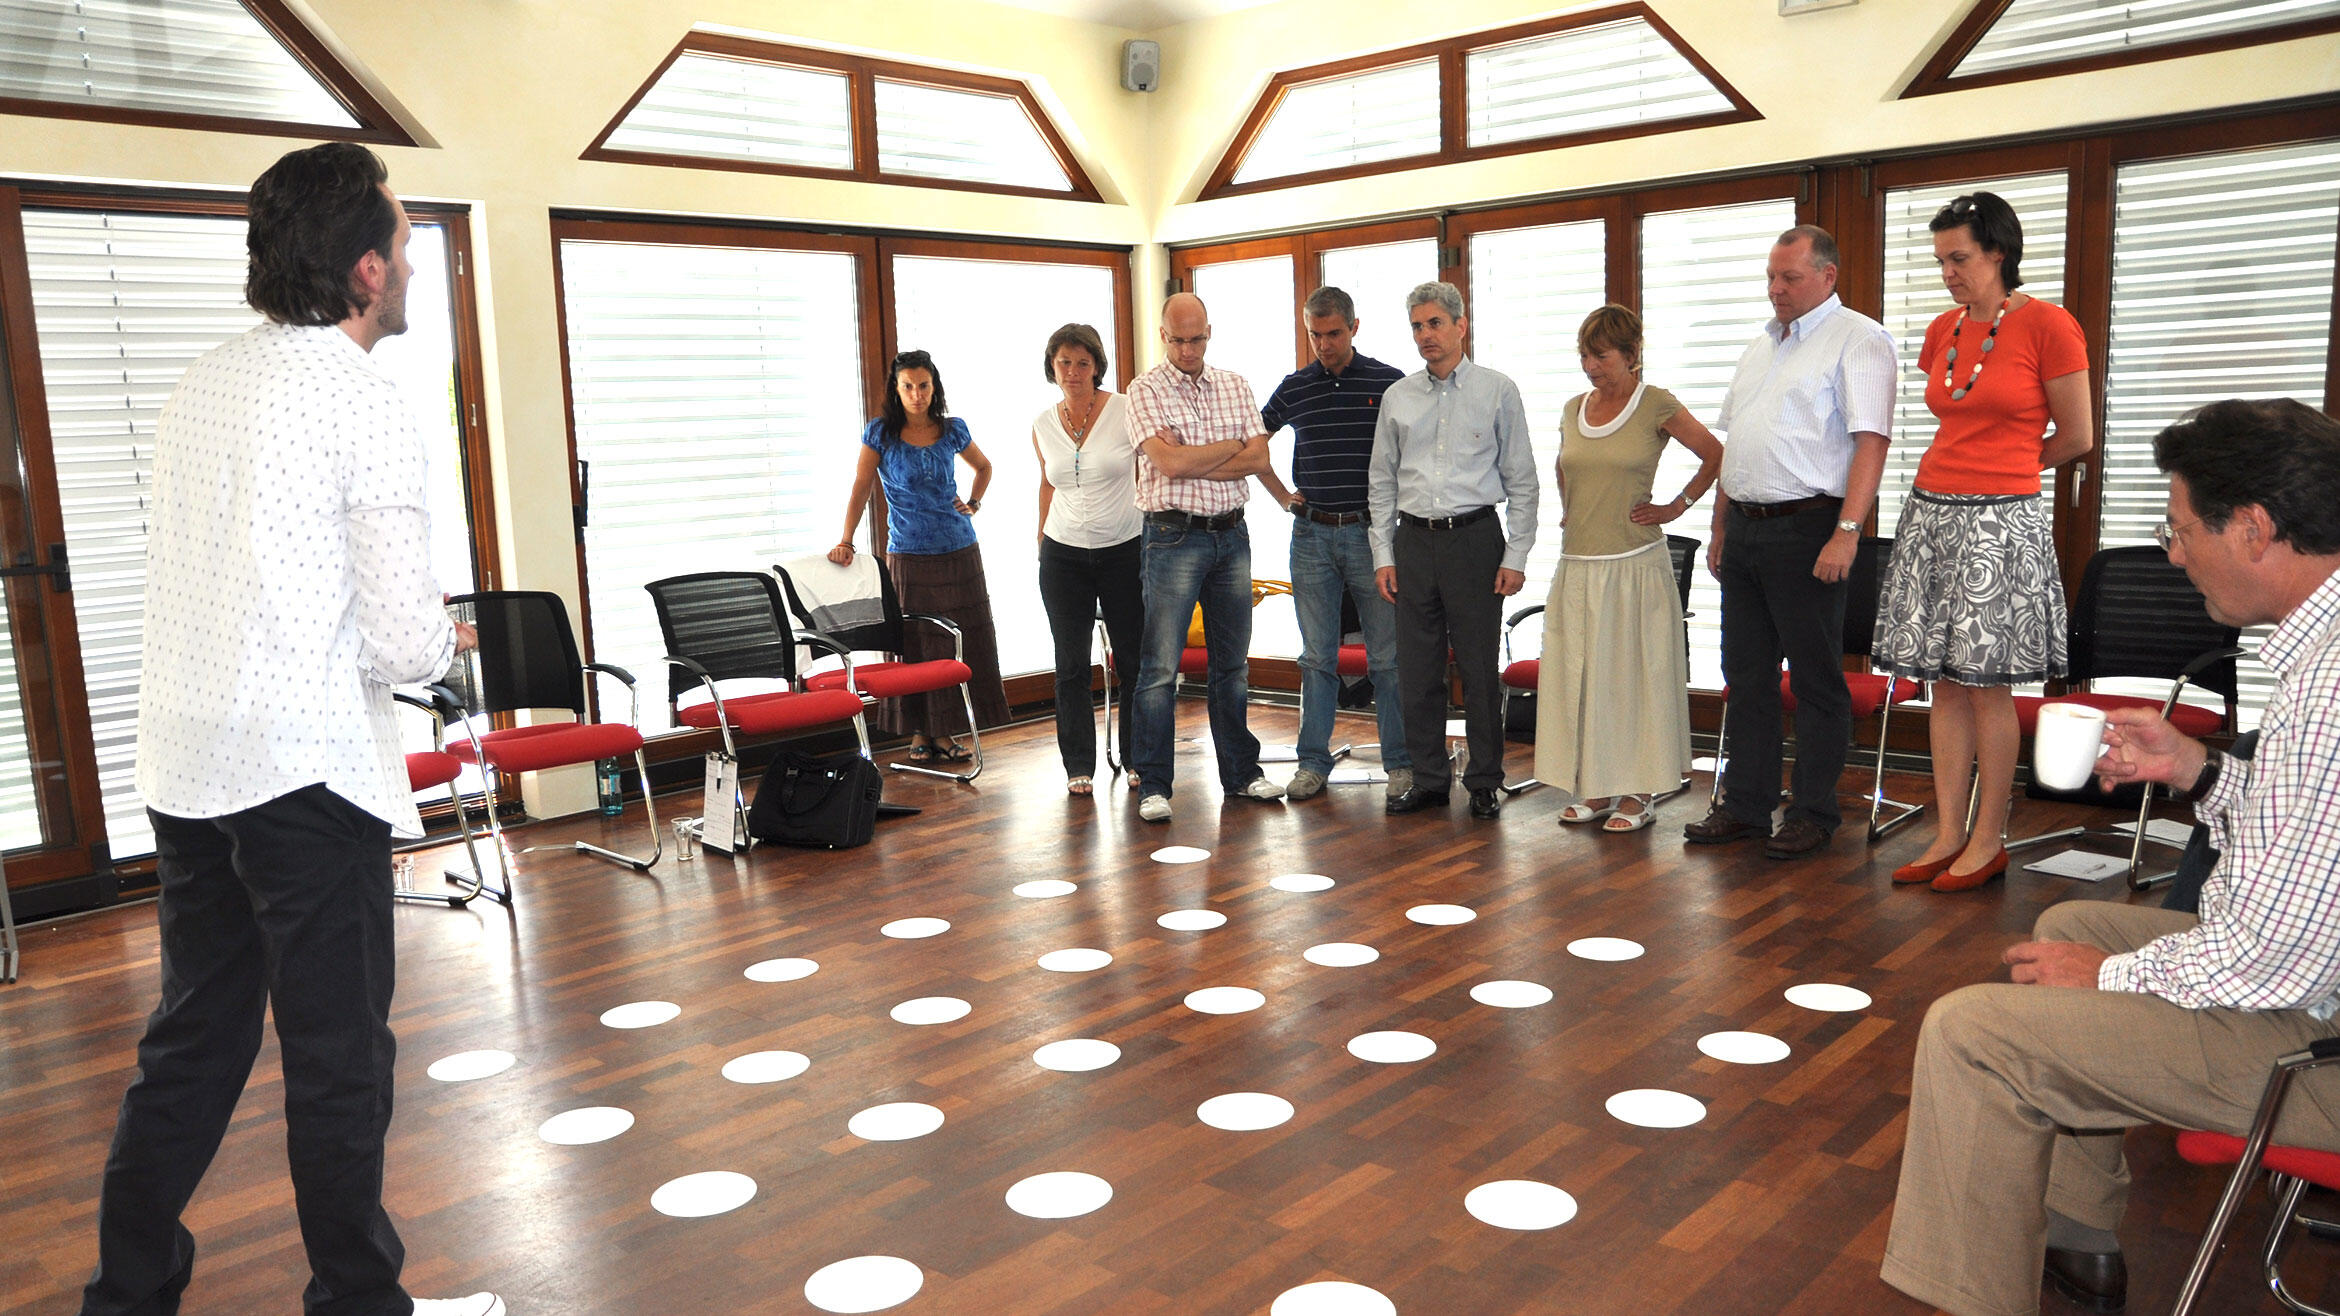 people face each other in two groups in an exercise